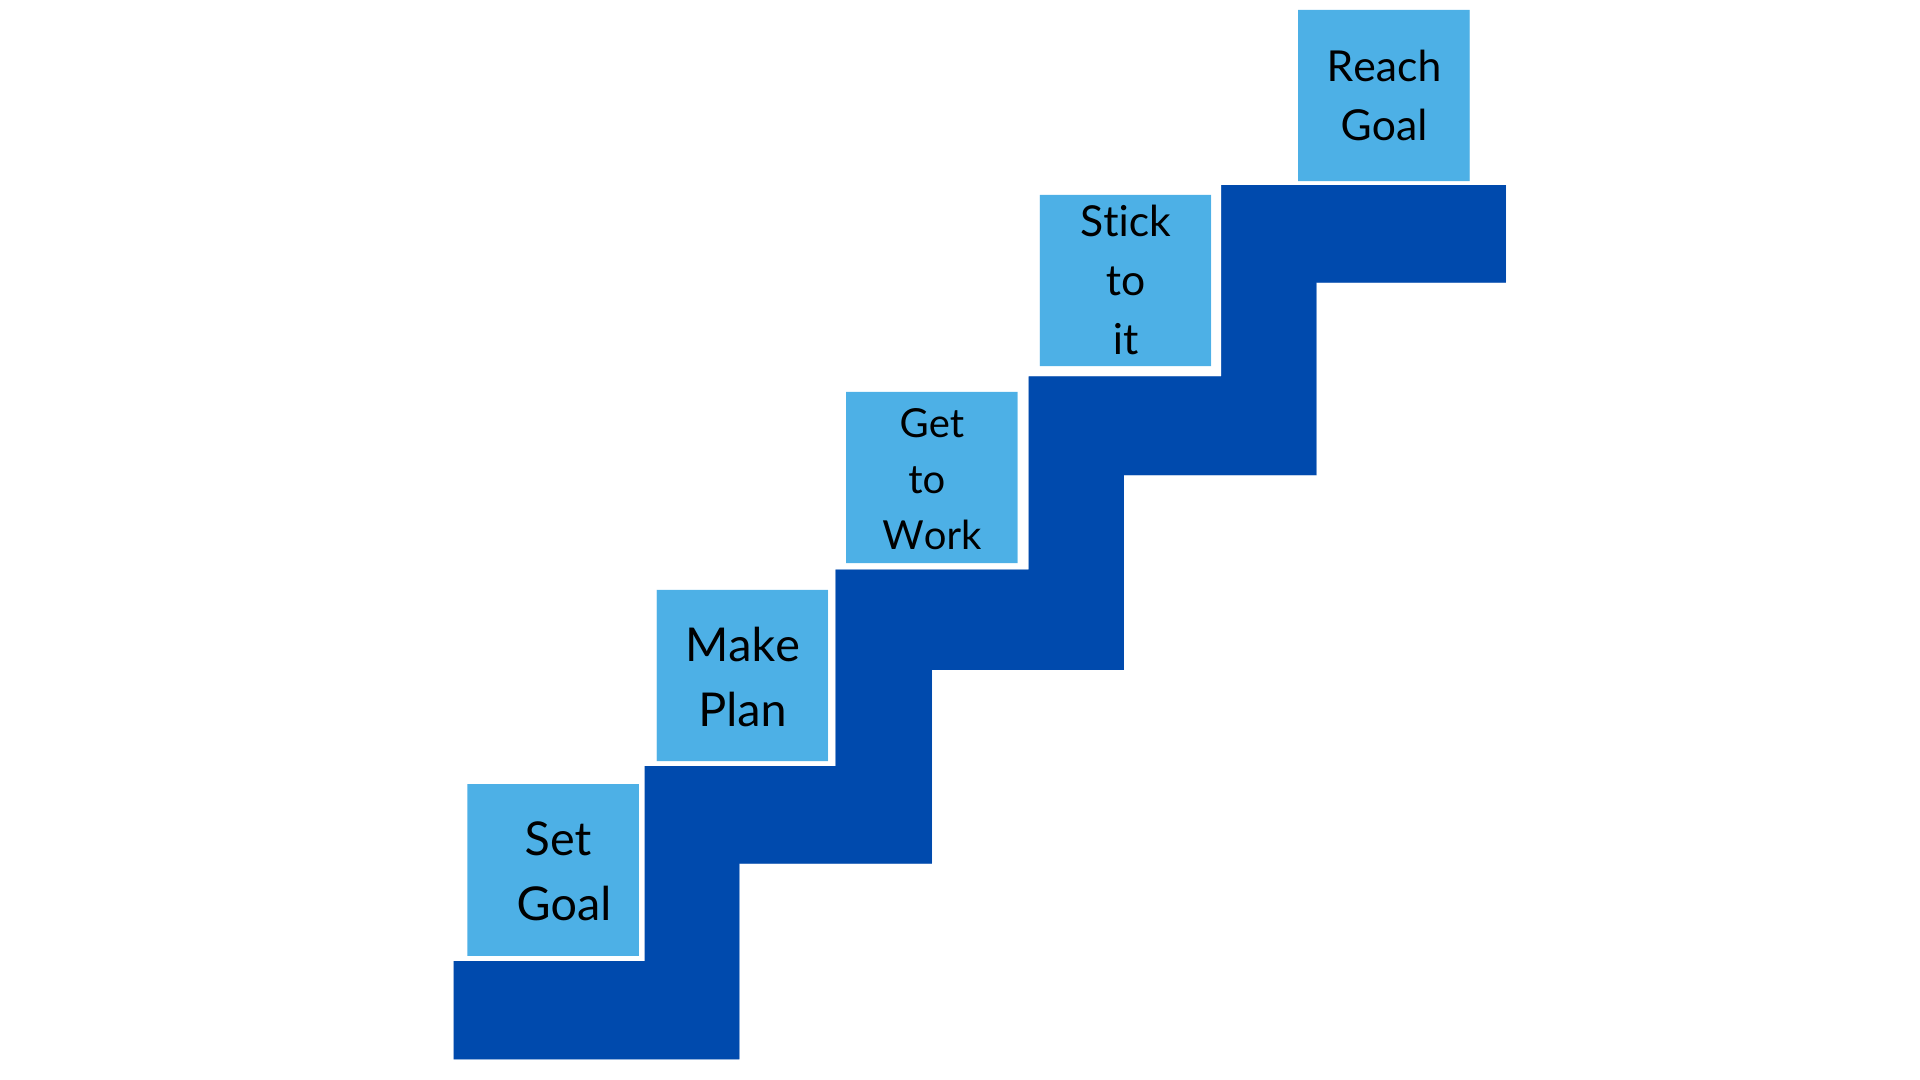 The steps to reach your goal: Set Goal, Make Plan, Get to Work, Stick to it, Reach Goal